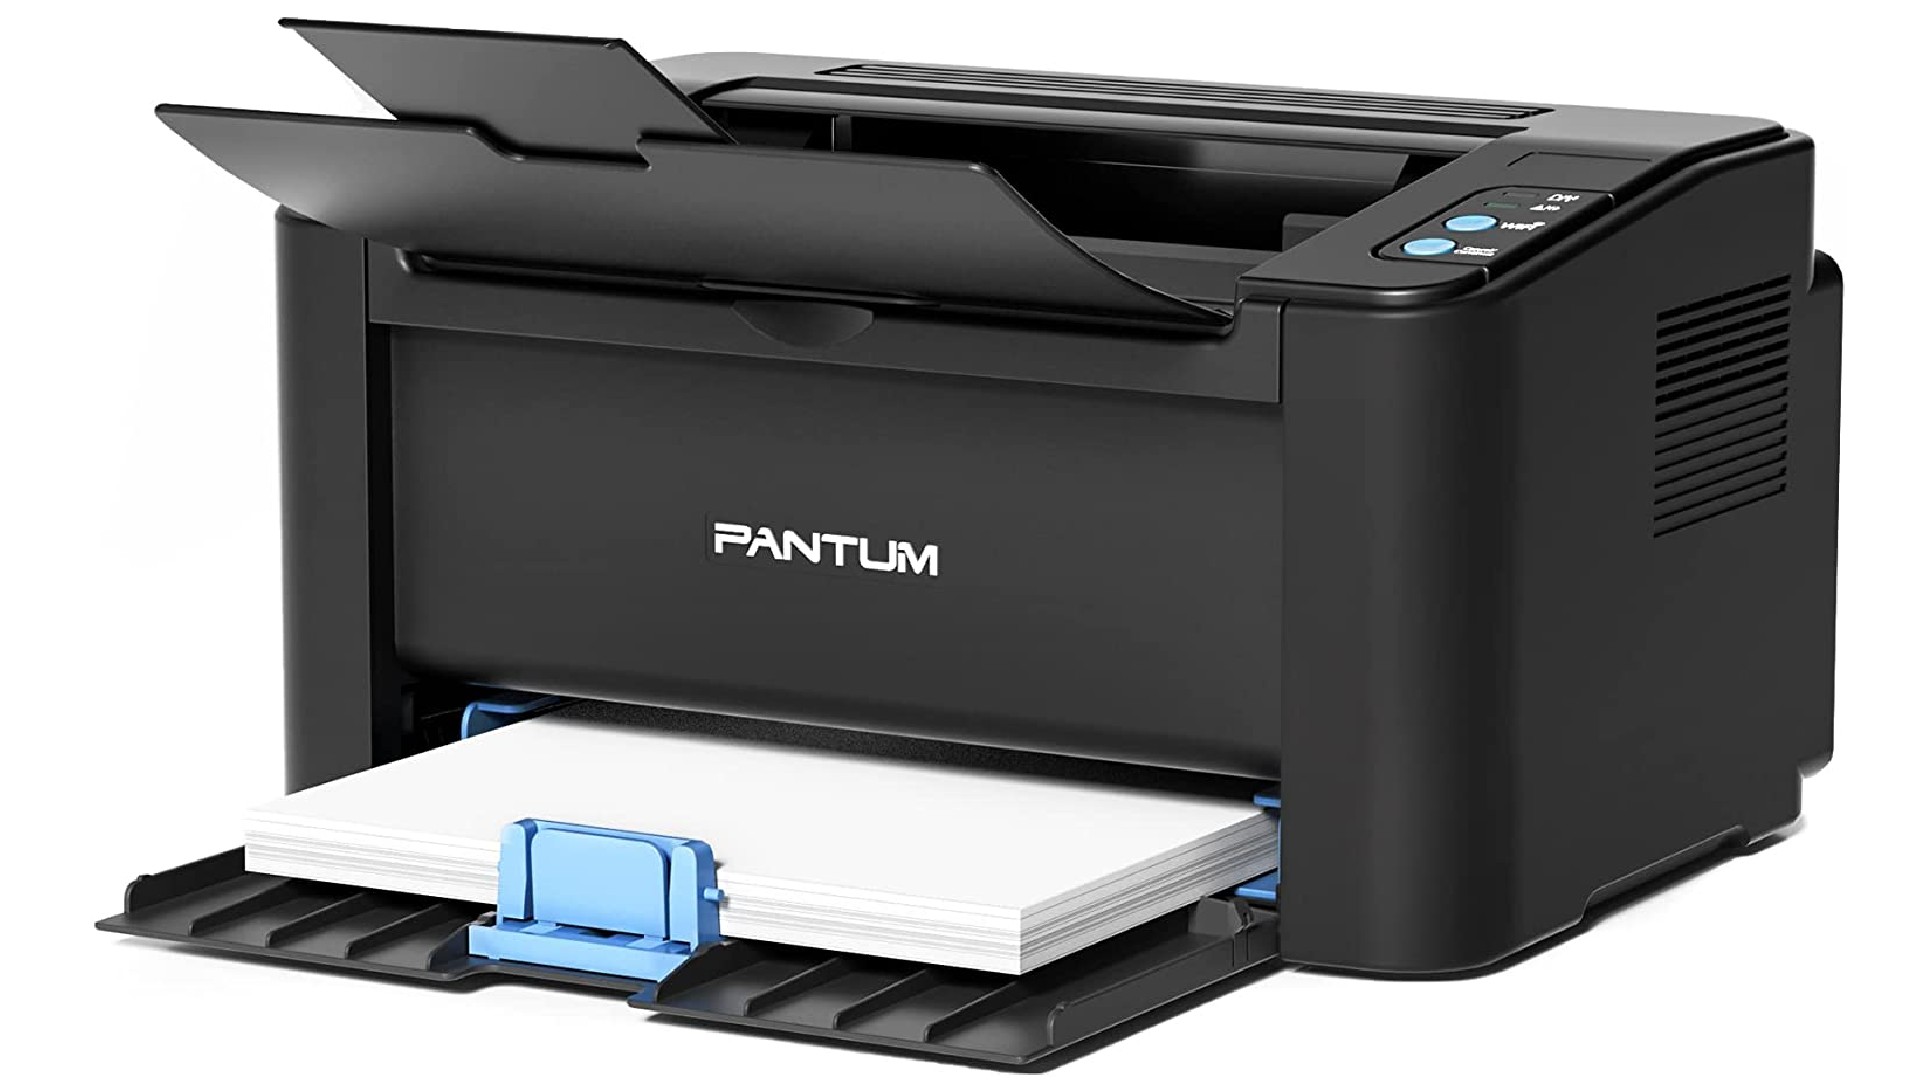 Product shot of Pantum P2200W, one of the best budget printers